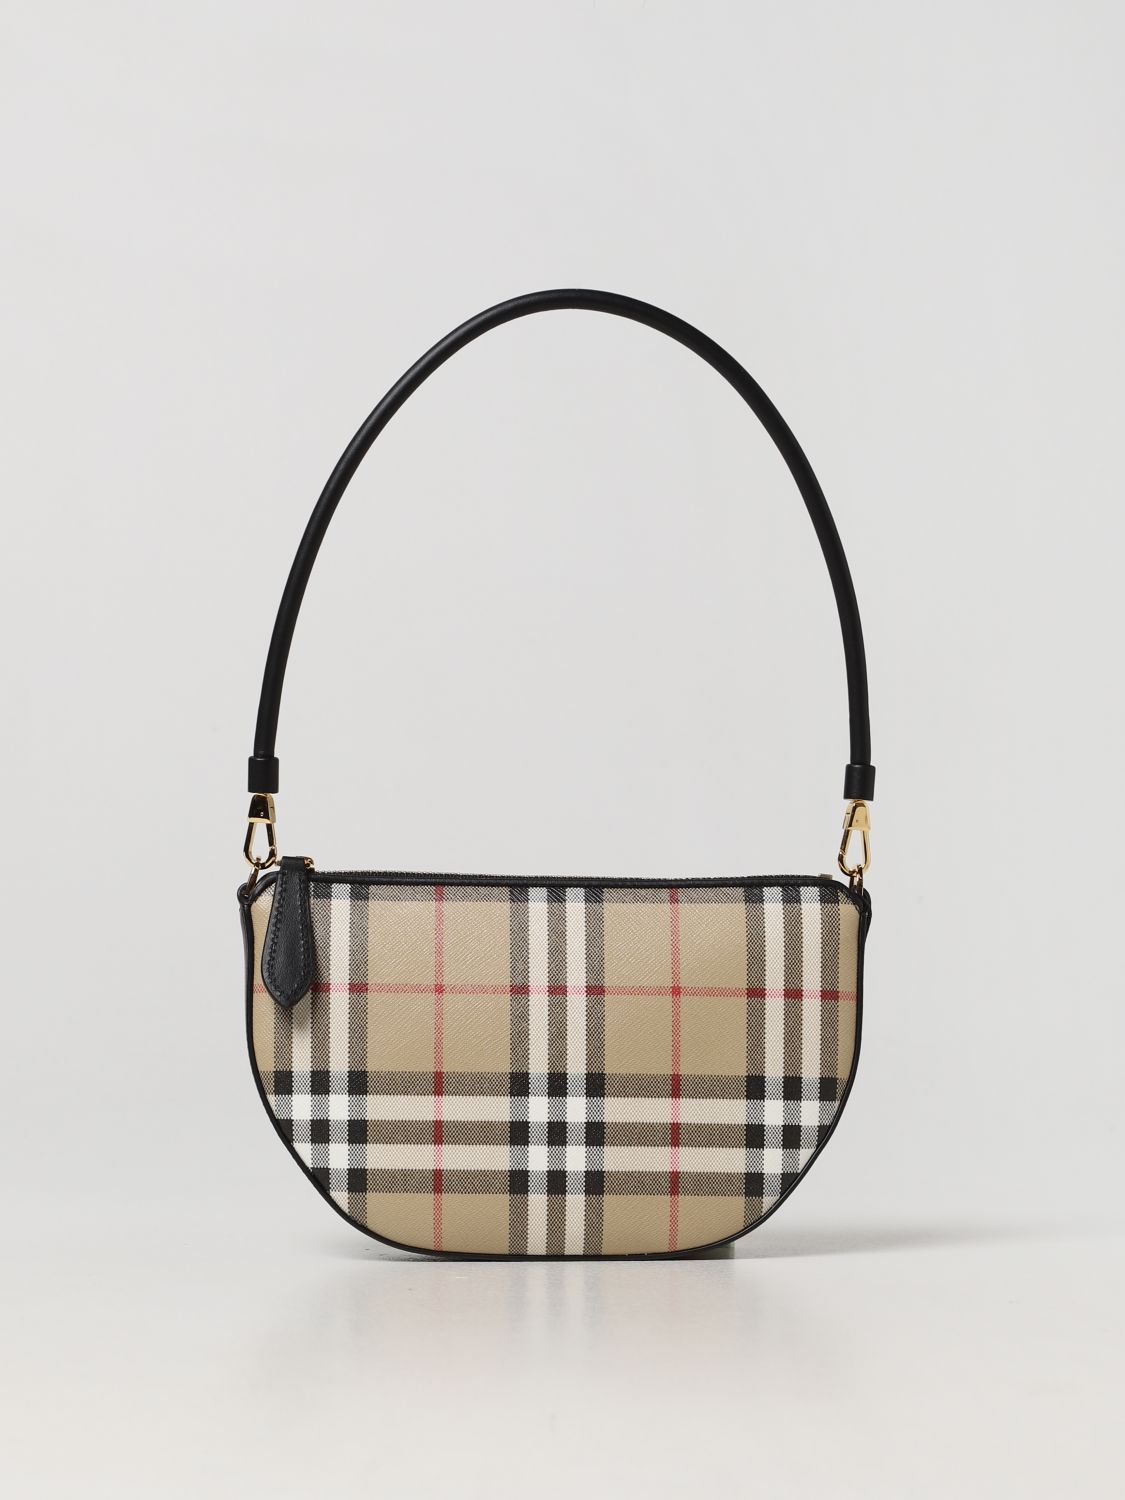 BURBERRY: Olympia bag - Beige  Burberry mini bag 8058006 online at